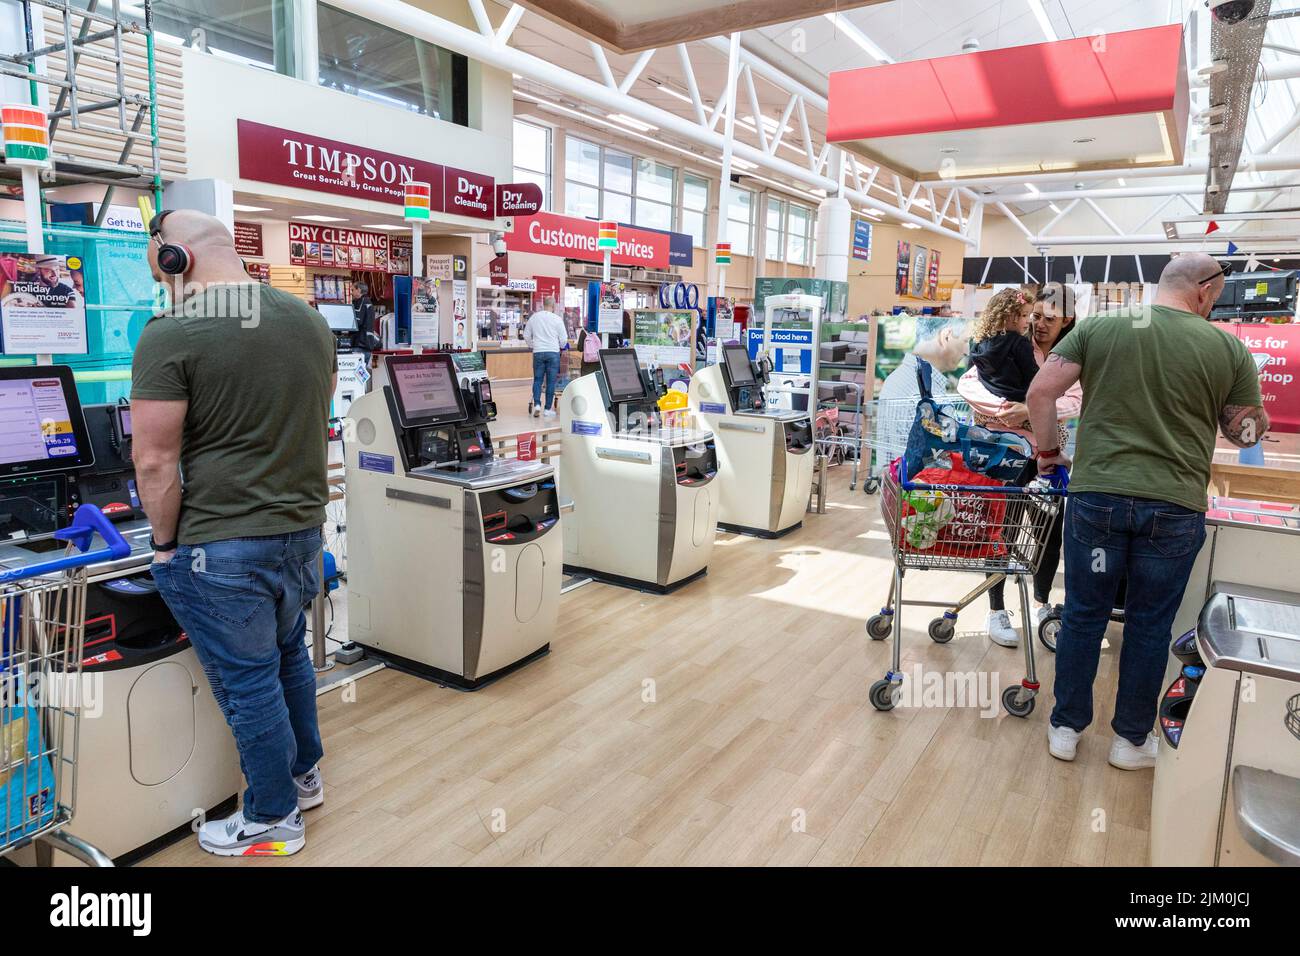 Tesco supermarket, customers using self checkout terminals to pay for their groceries, Tesco also provides scan as you shop service,Manchester,UK Stock Photo